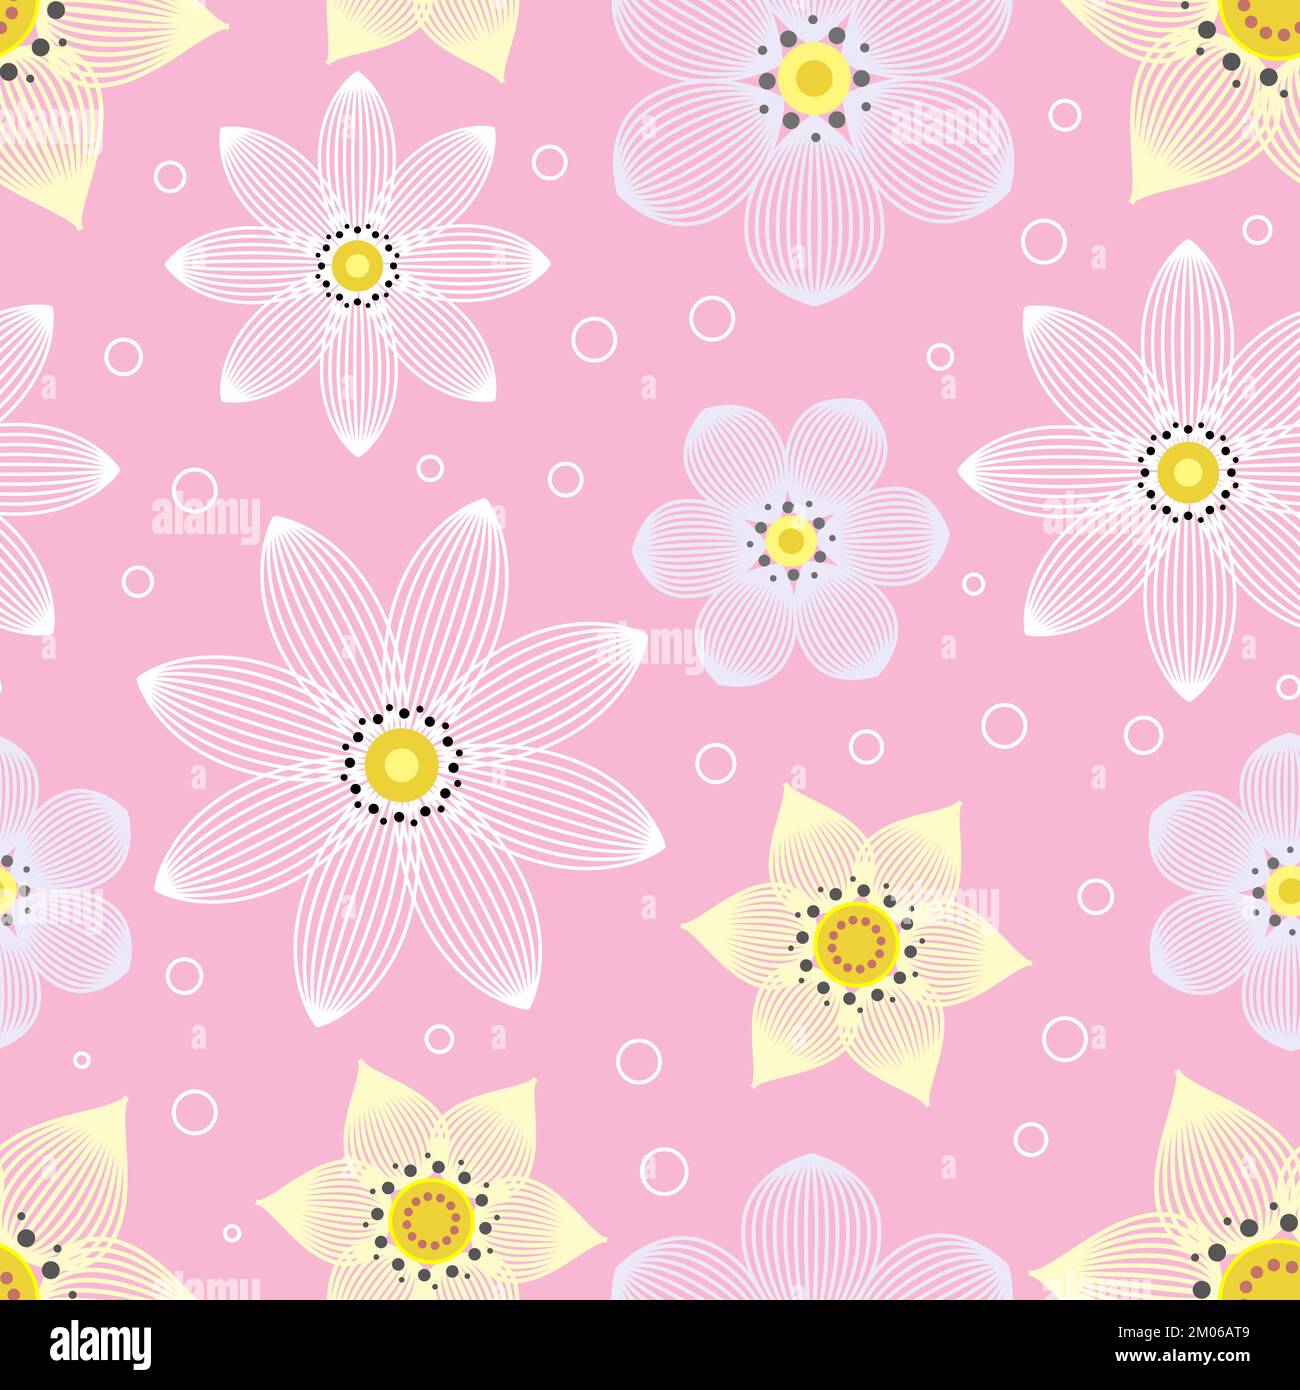 Seamless pattern with flowers on a pink background. For fabric design, wallpapers, backgrounds, wrapping paper, scrapbooking and so on. Vector Stock Vector